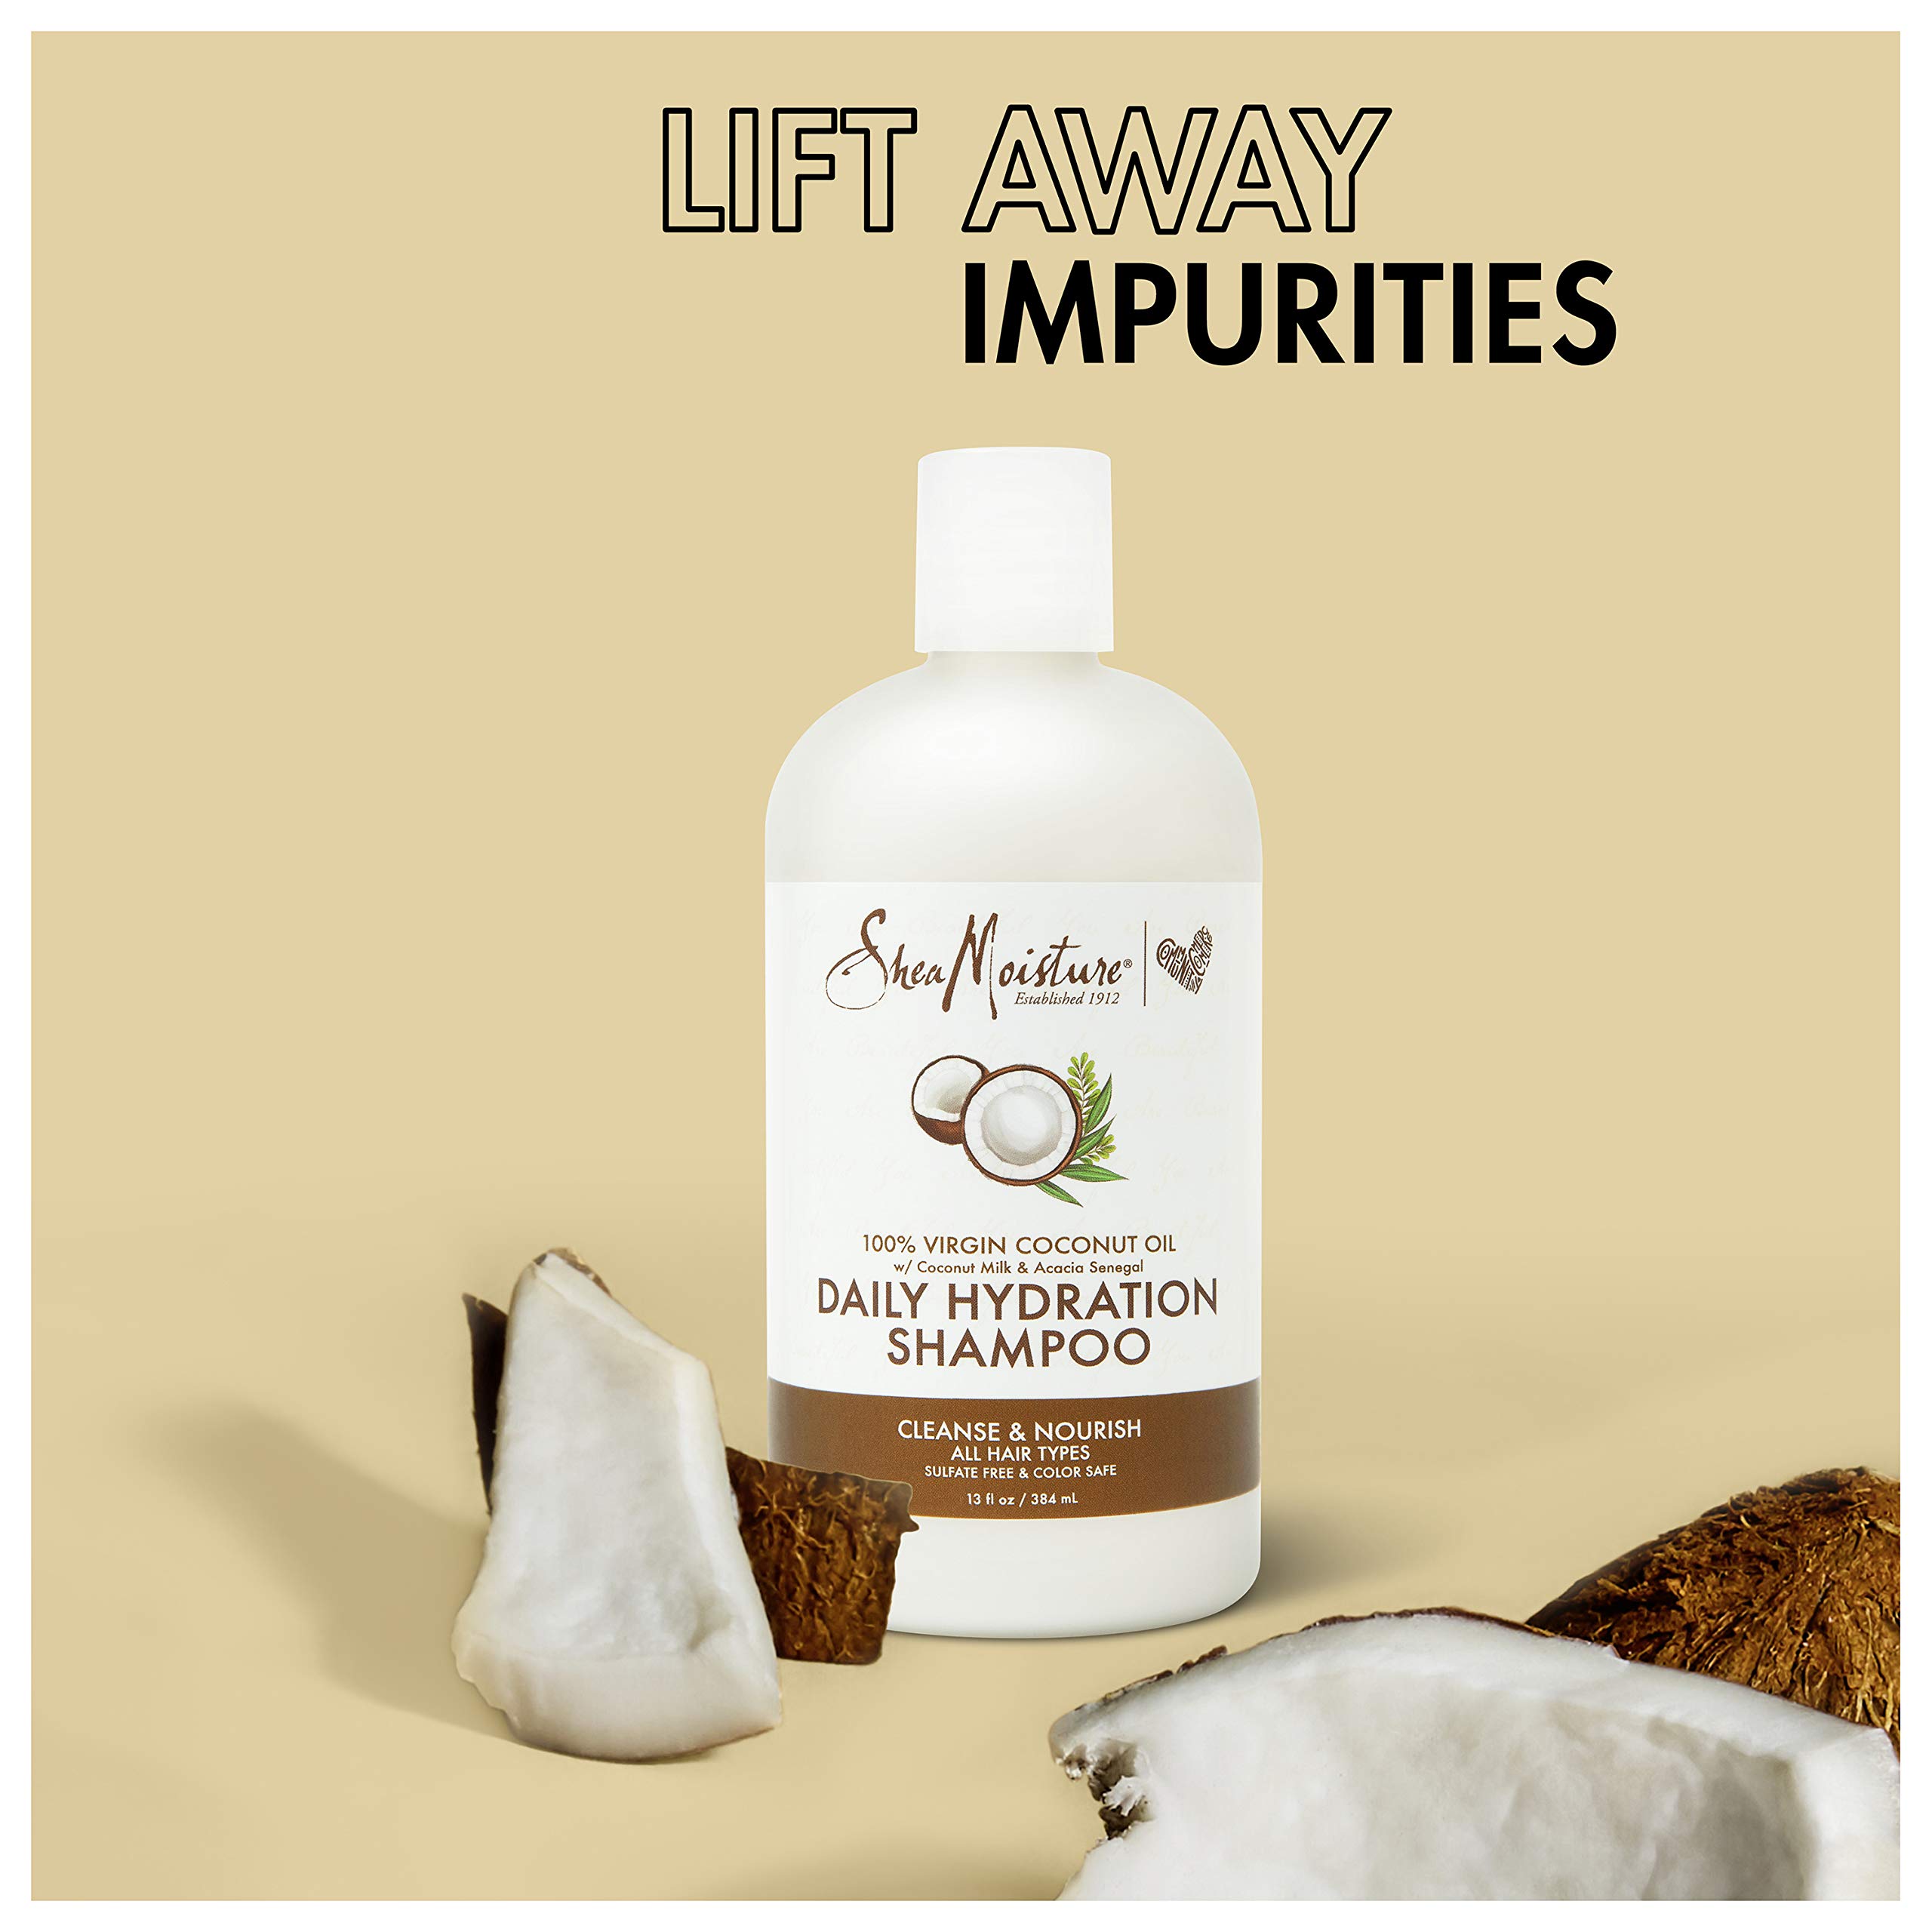 Sheamoisture Daily Hydration Shampoo for All Hair Types 100% Virgin Coconut Oil Sulfate-Free 13 oz